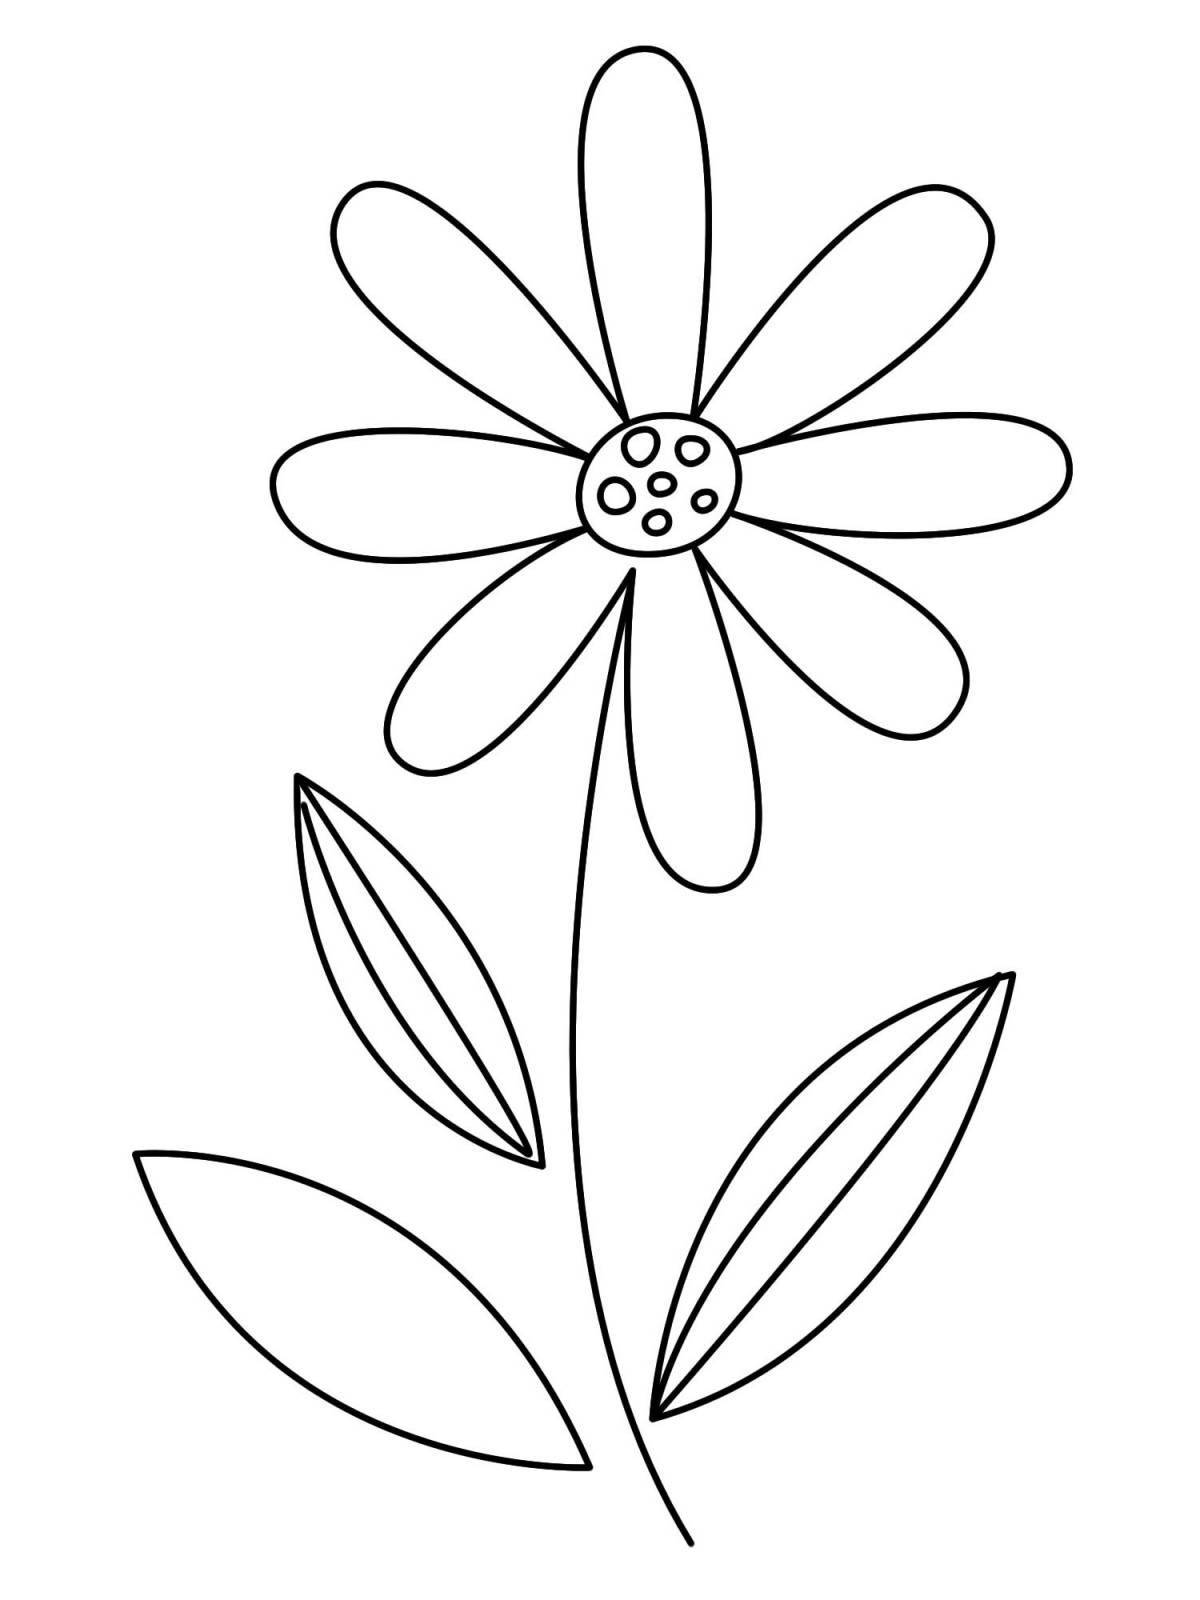 Beautiful daisy coloring page